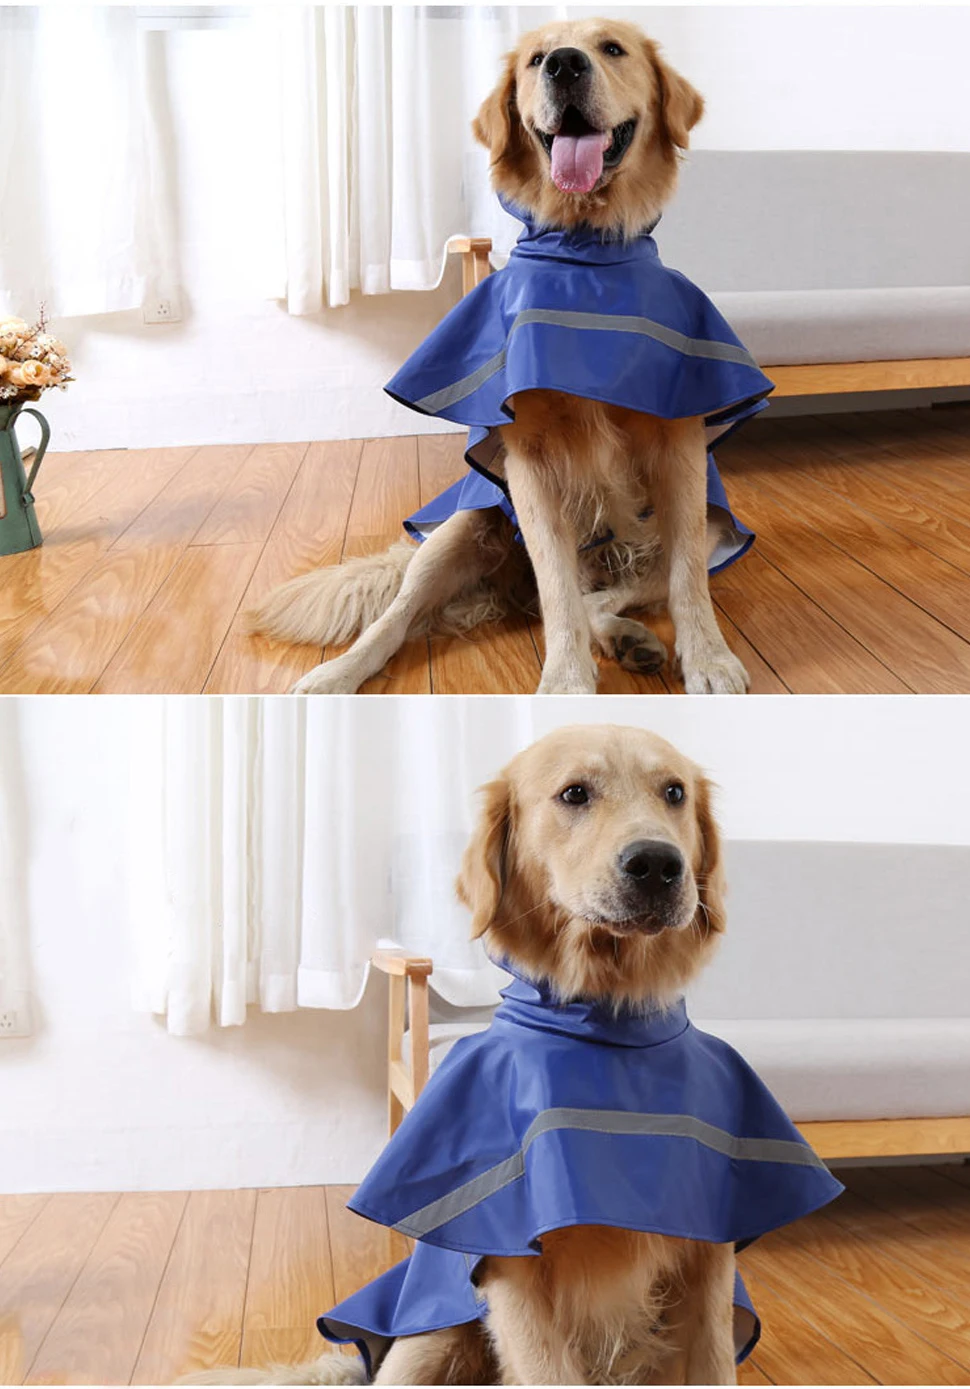 HEYPET Pet Big Dog Raincoat Waterproof Reflective Clothes for Small Large Dogs Jumpsuit Hooded Overalls Labrador Golden Retrieve